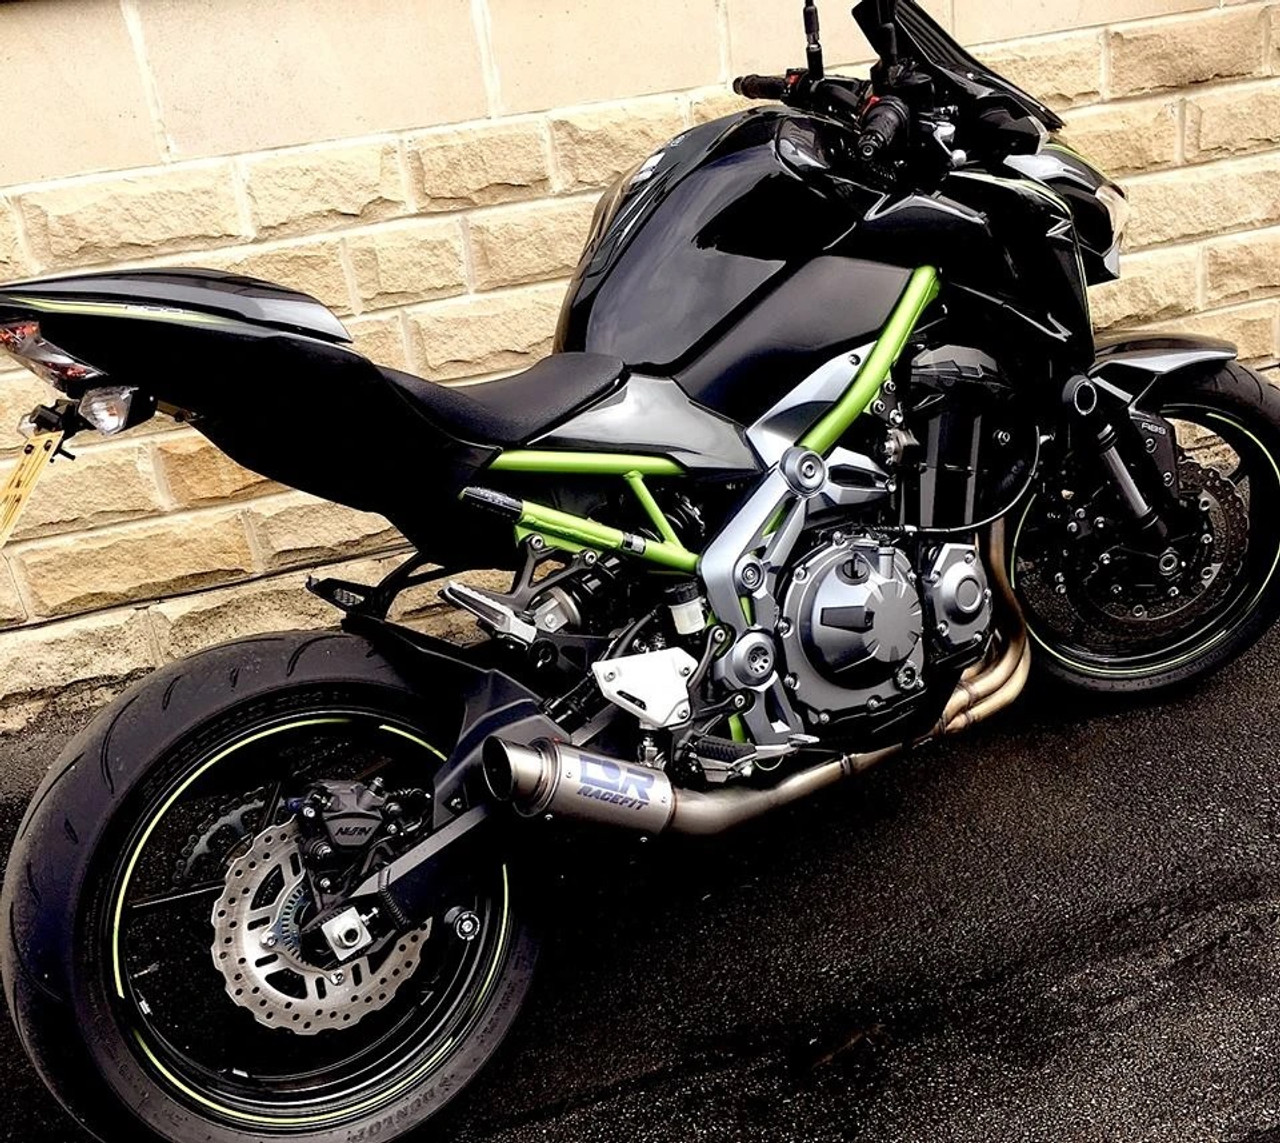 5 Best Accessories For The Kawasaki Z900 